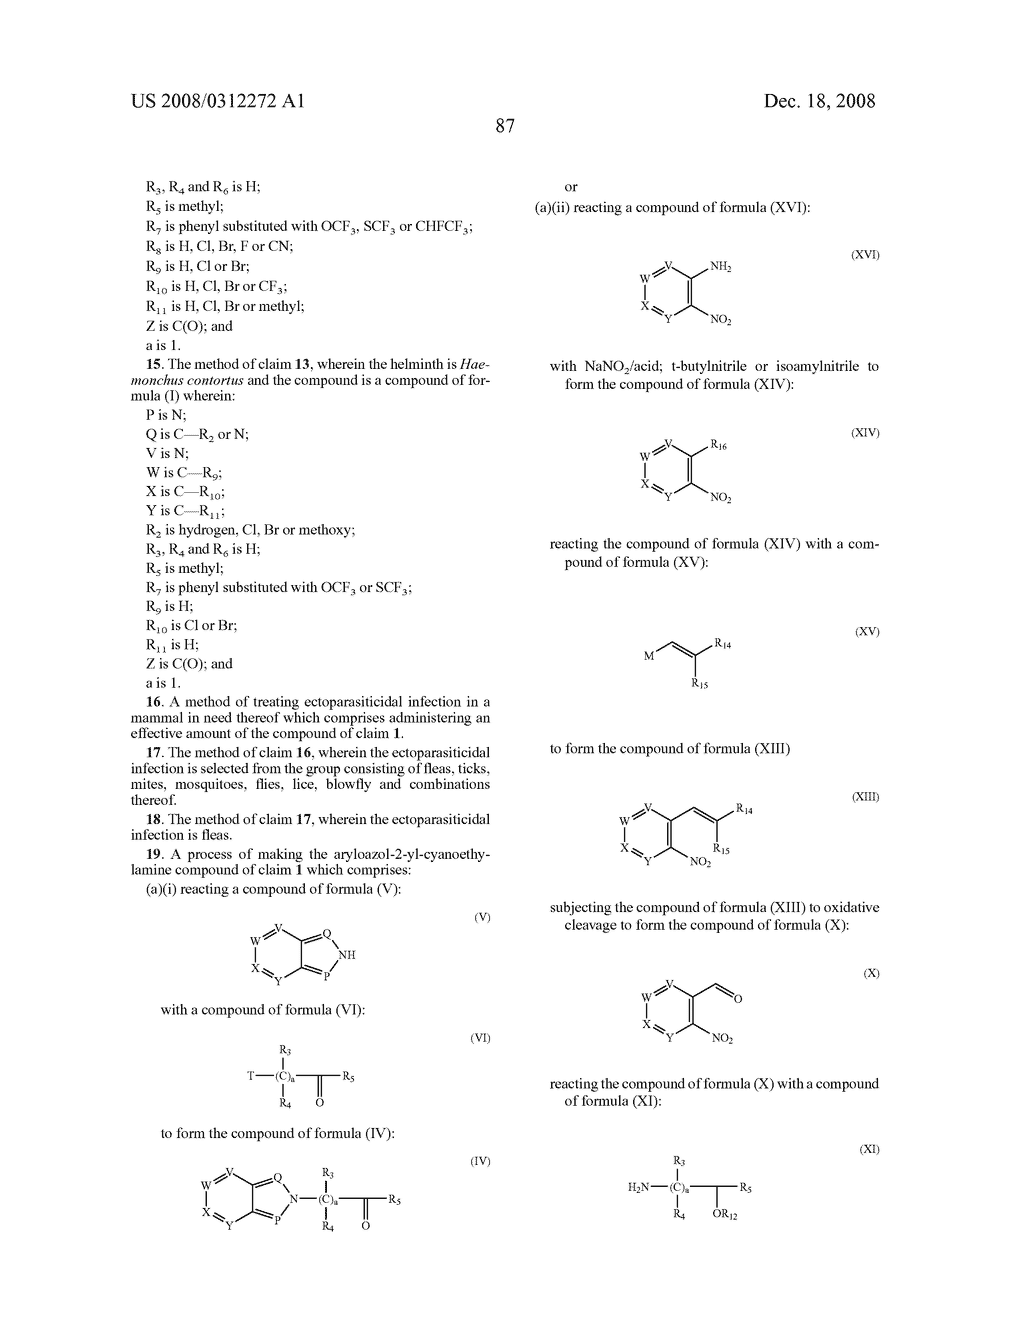 ARYLOAZOL-2-YL CYANOETHYLAMINO COMPOUNDS, METHOD OF MAKING AND METHOD OF USING THEREOF - diagram, schematic, and image 88